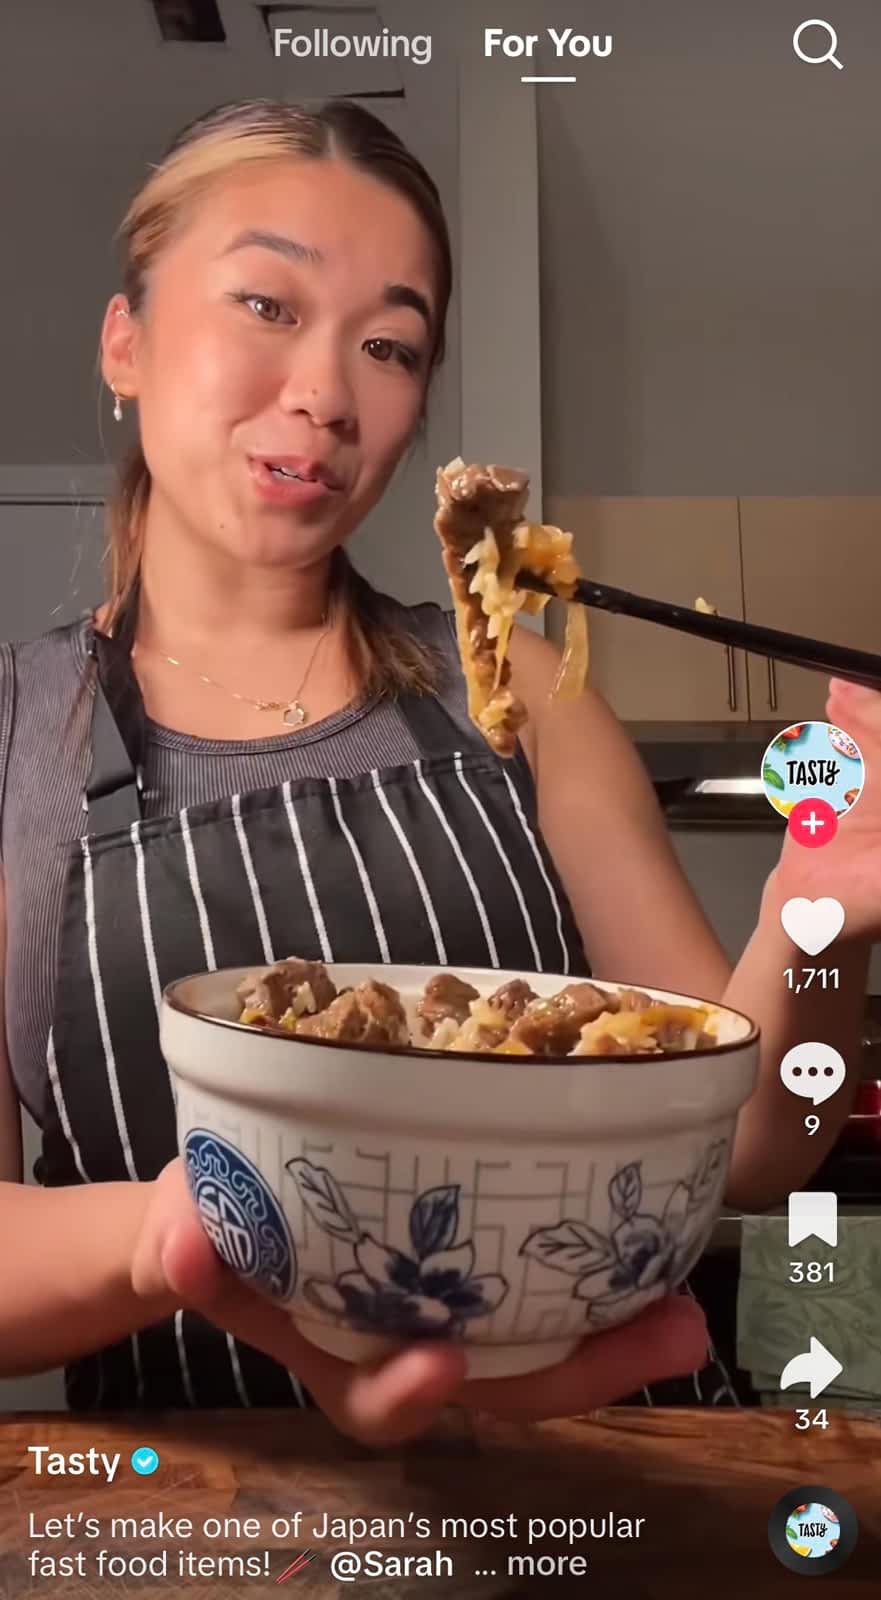 TikTok video by Tasty showing cooking tutorial.